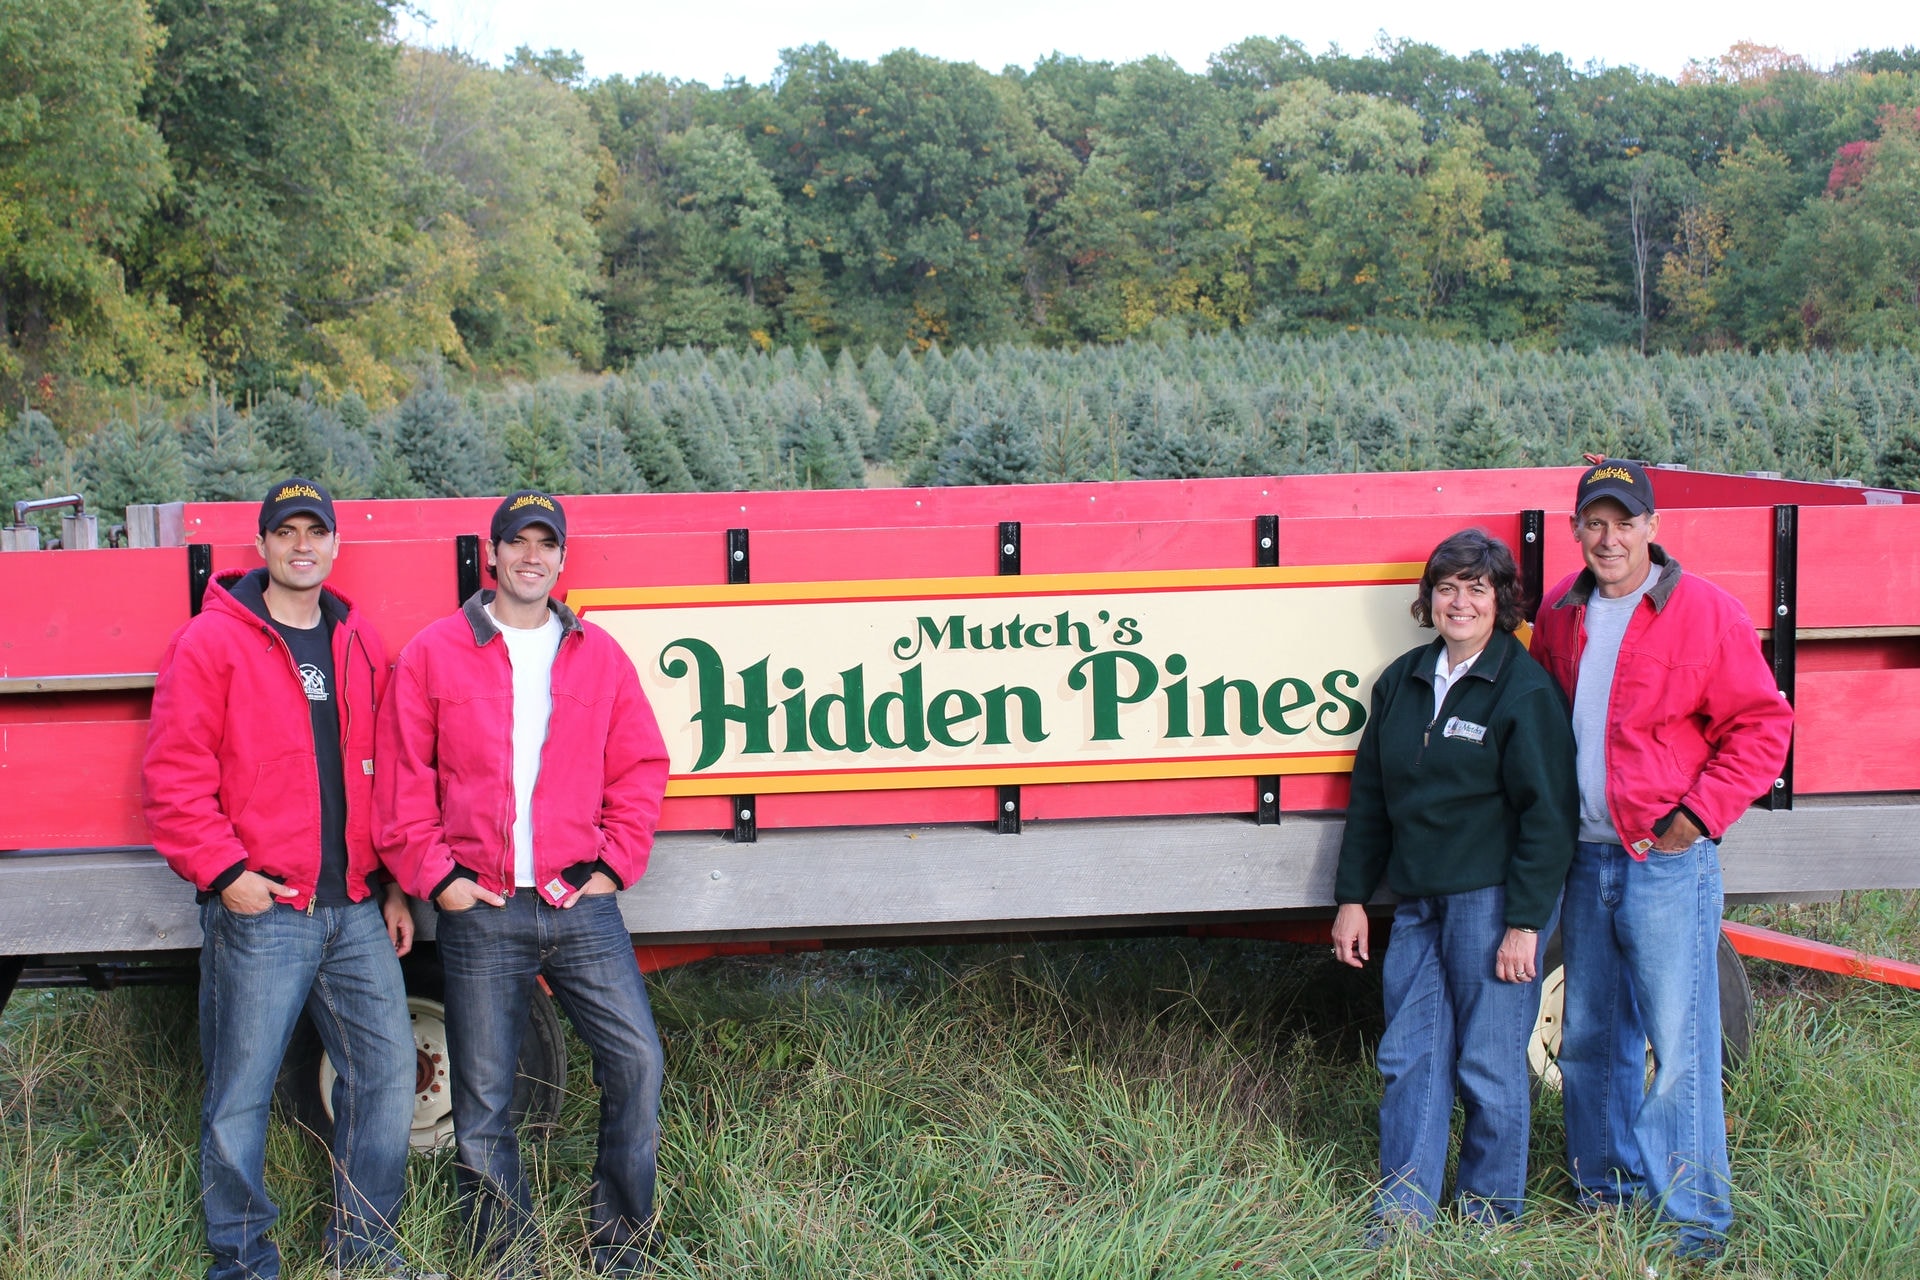 Family trees: When not at his practice, Dr. Peter Mutch (at far right), spends his time running Mutch's Hidden Pines tree far with his wife Nancy (third from left) and their sons, (at left) Andy Mutch and Dr. Nate Mutch. 